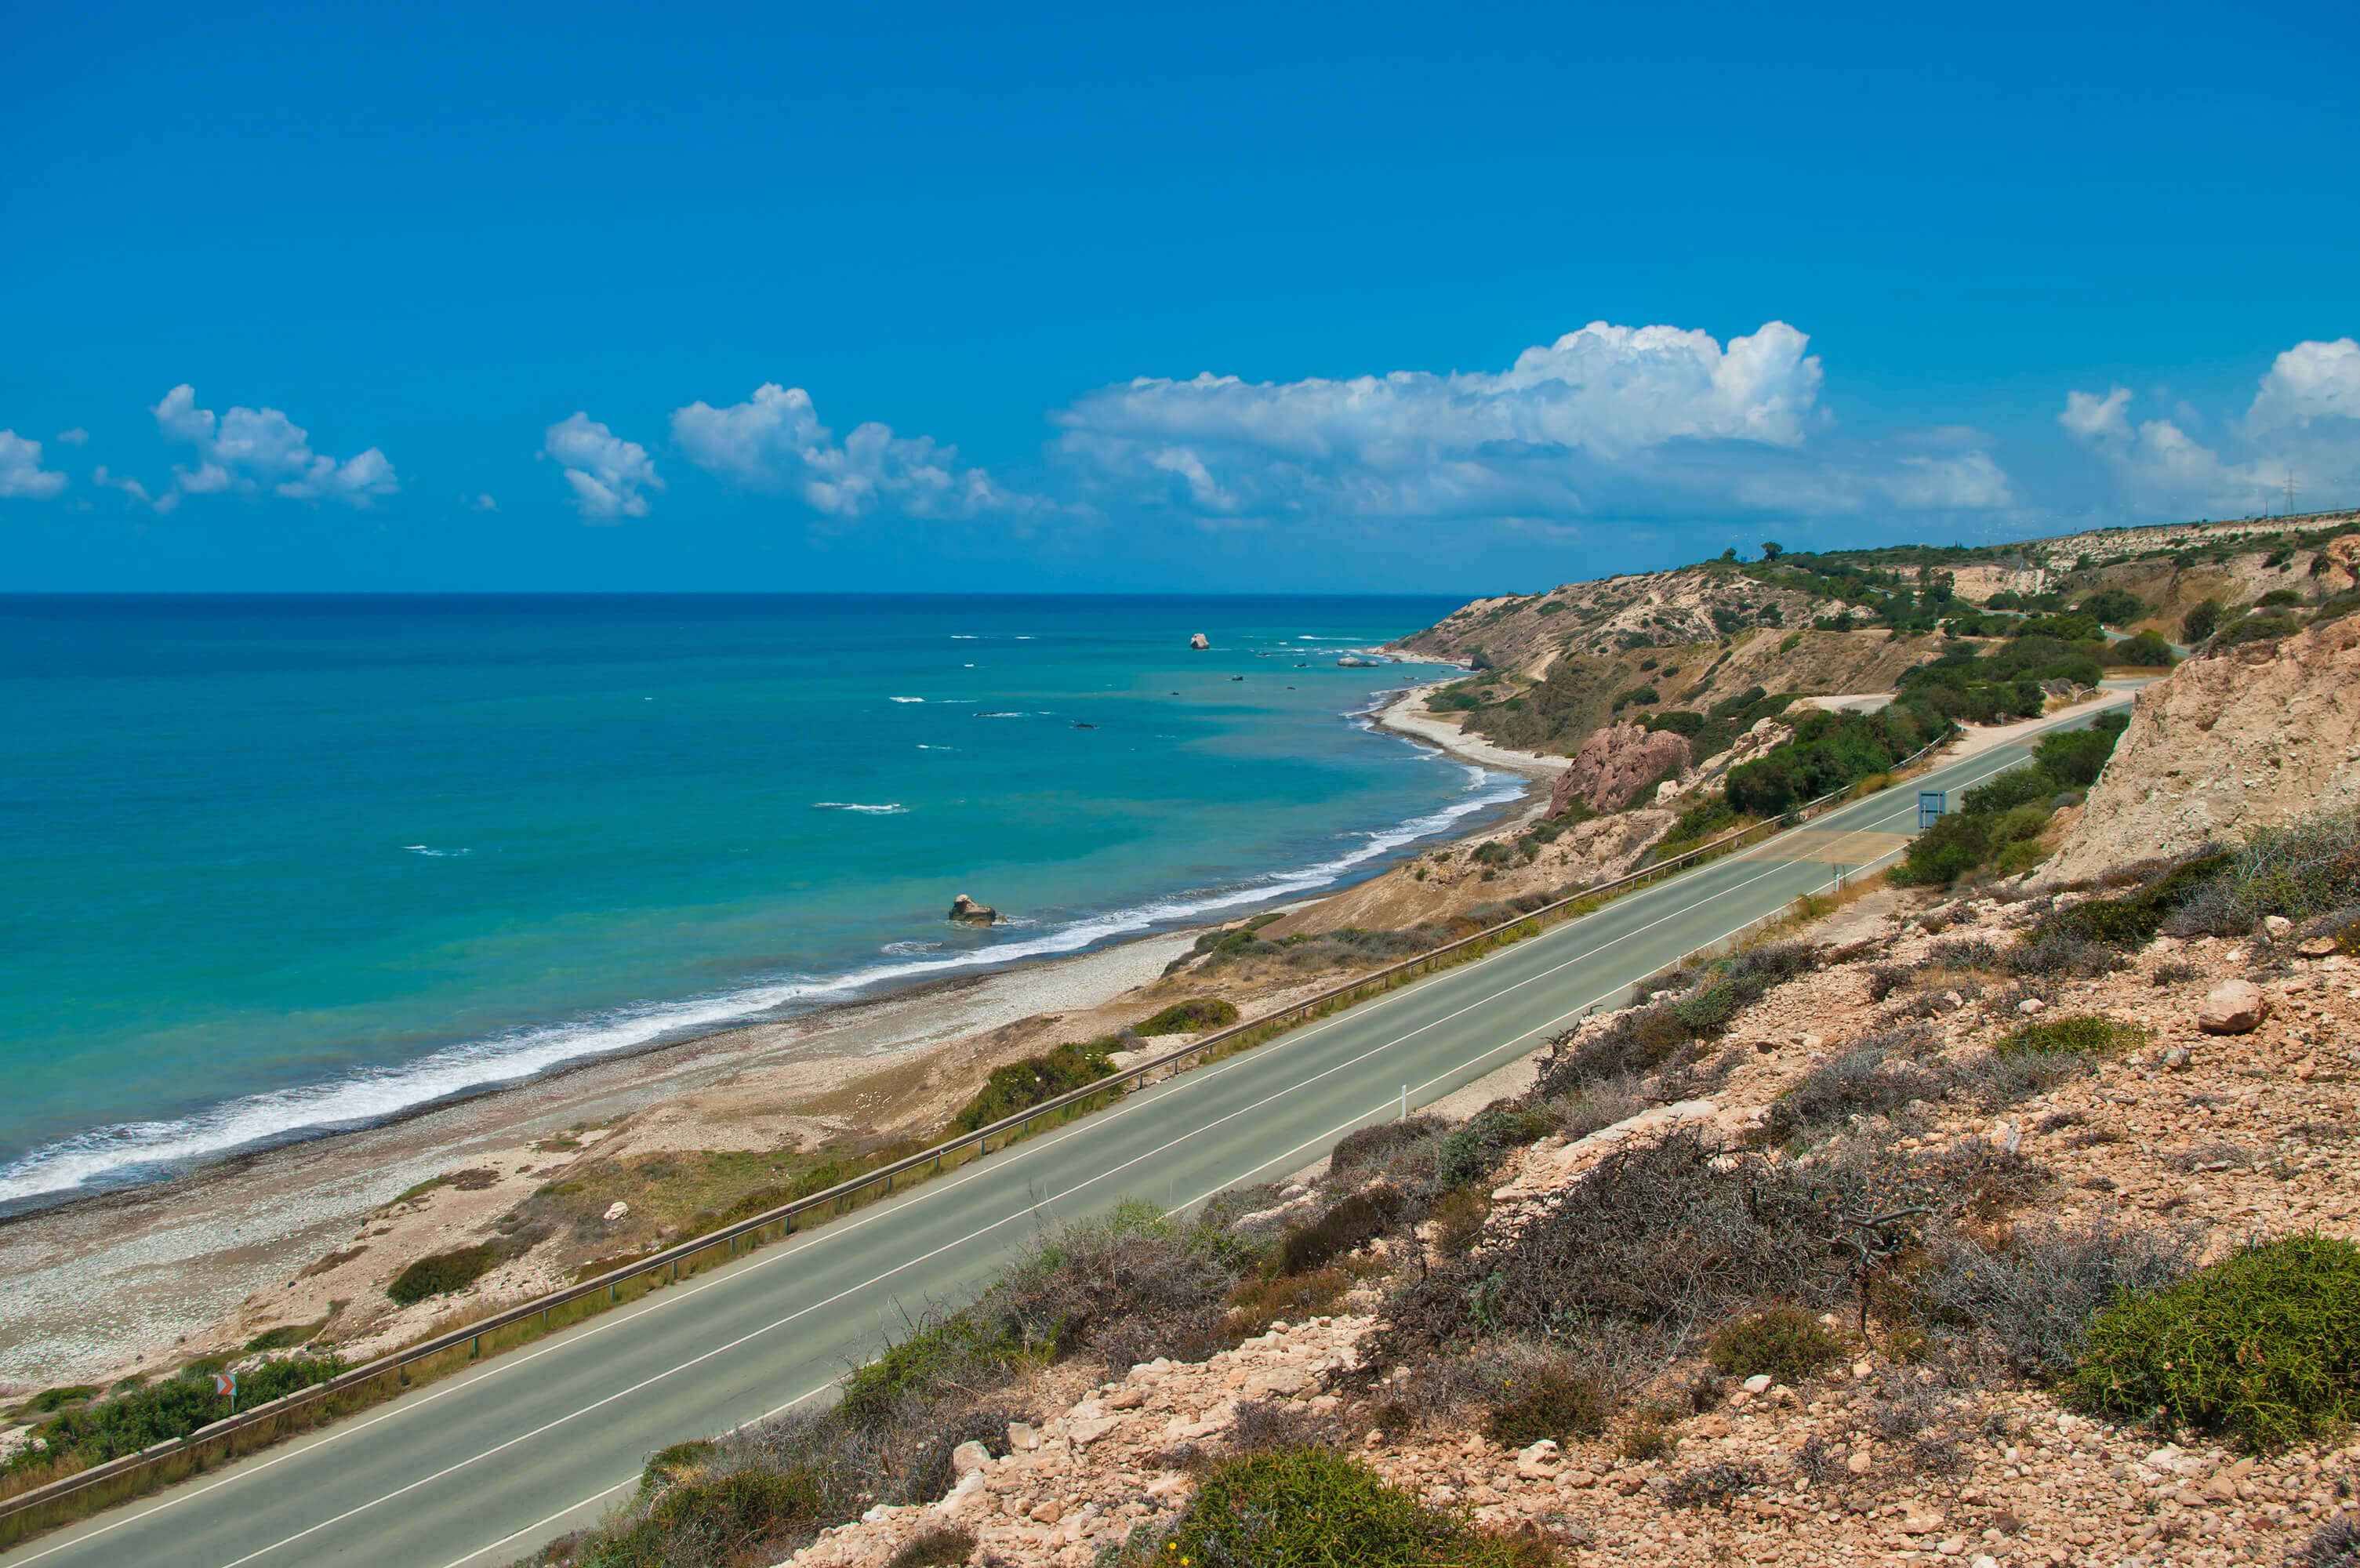 Indulge in beautiful views on your way to Karpaz